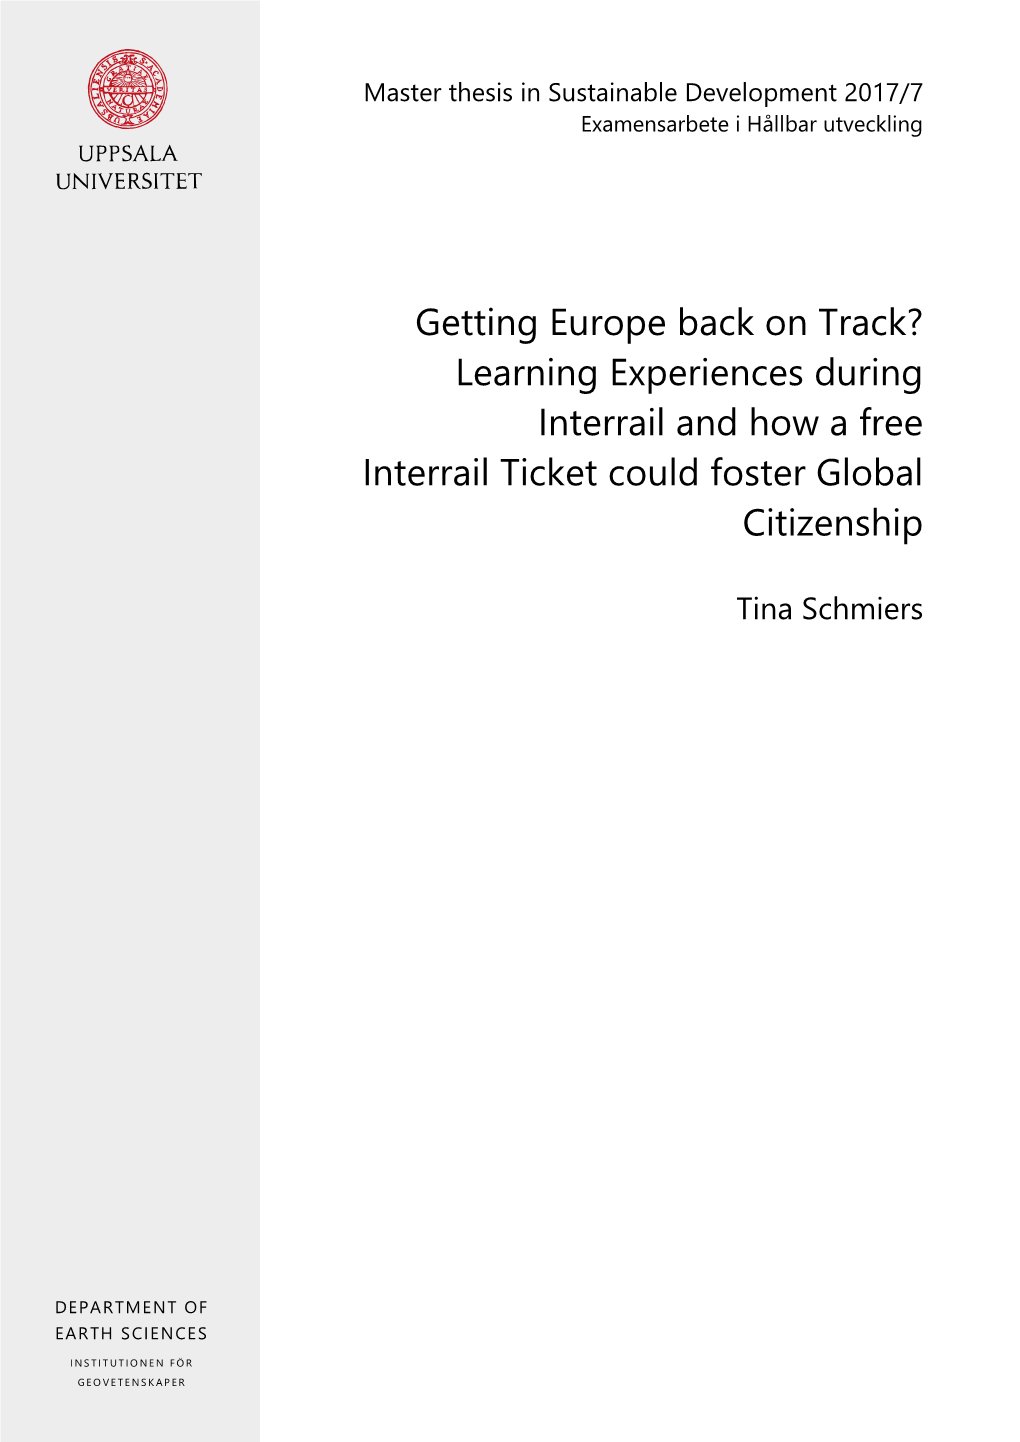 Getting Europe Back on Track? Learning Experiences During Interrail and How a Free Interrail Ticket Could Foster Global Citizenship